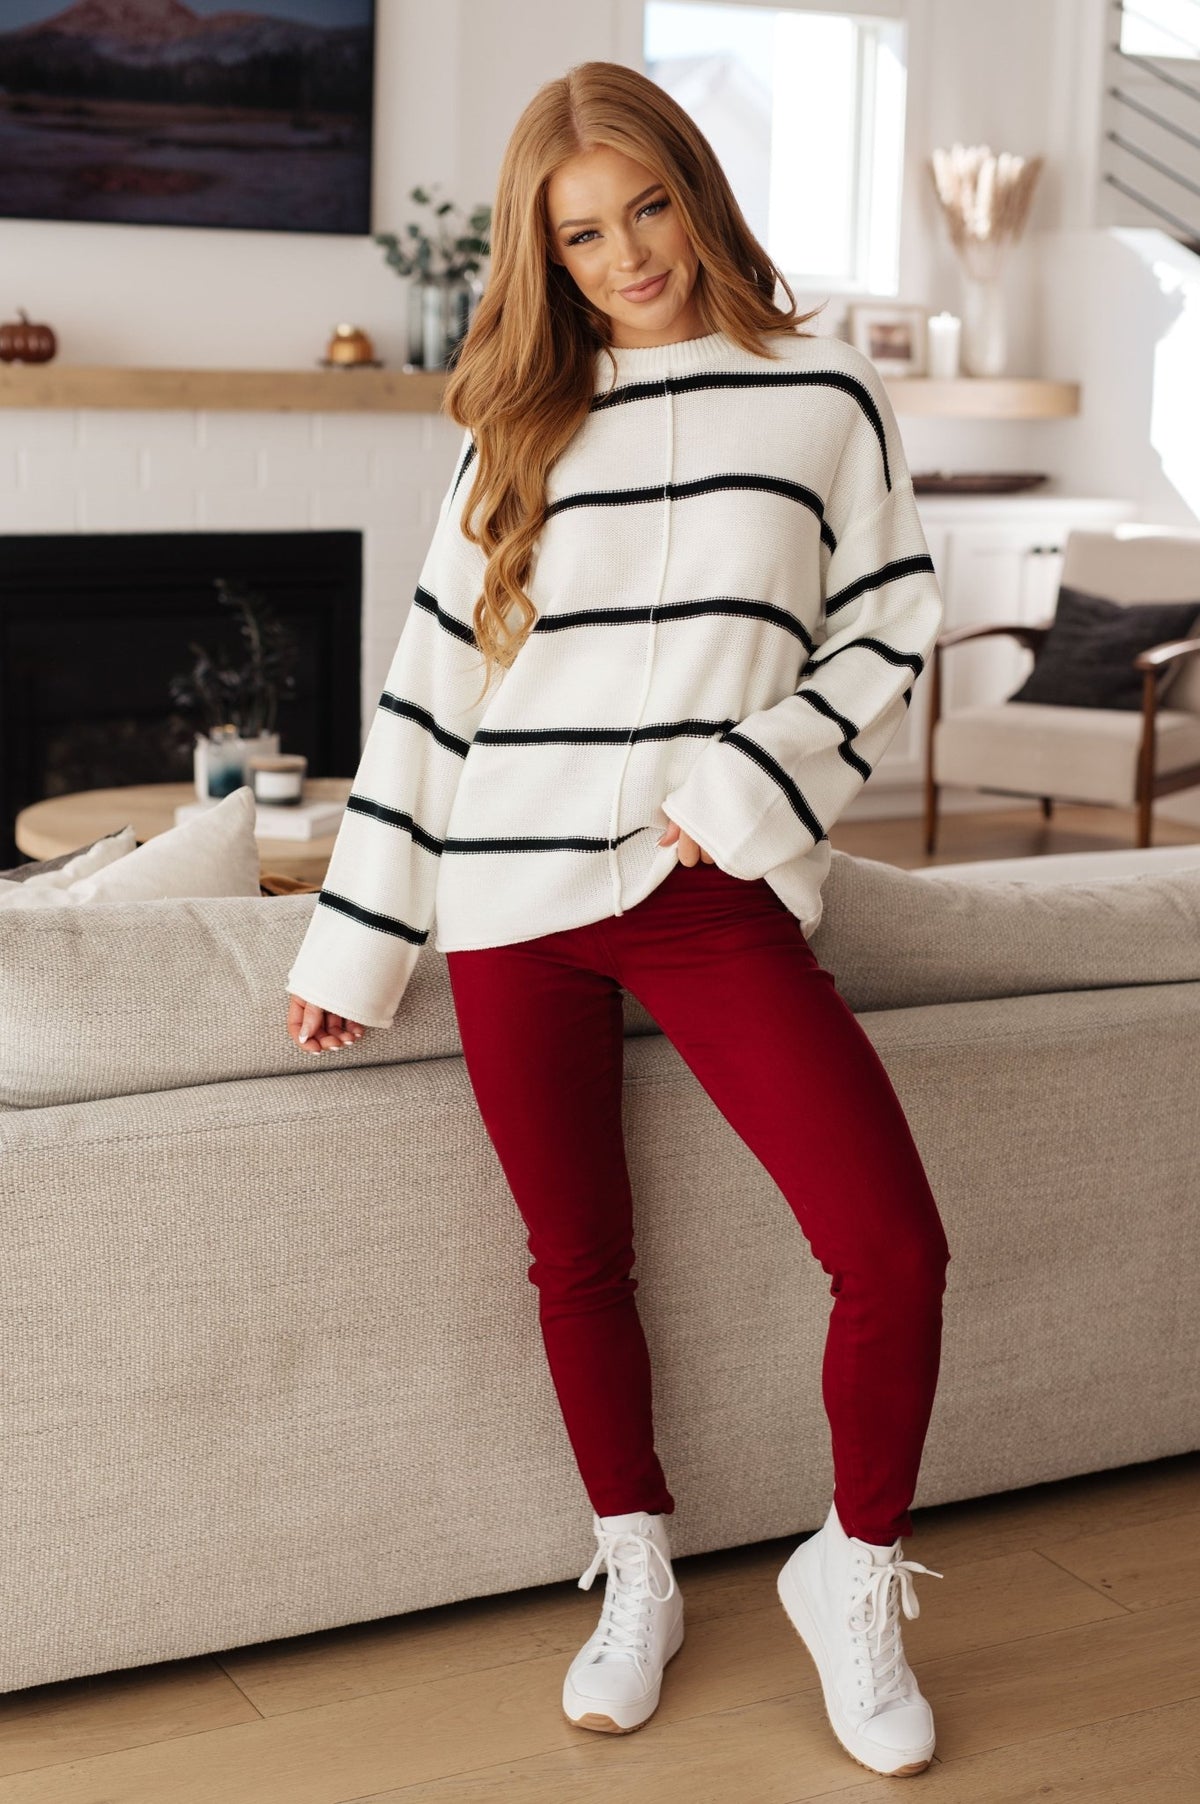 More or Less Striped Sweater - Happily Ever Atchison Shop Co.